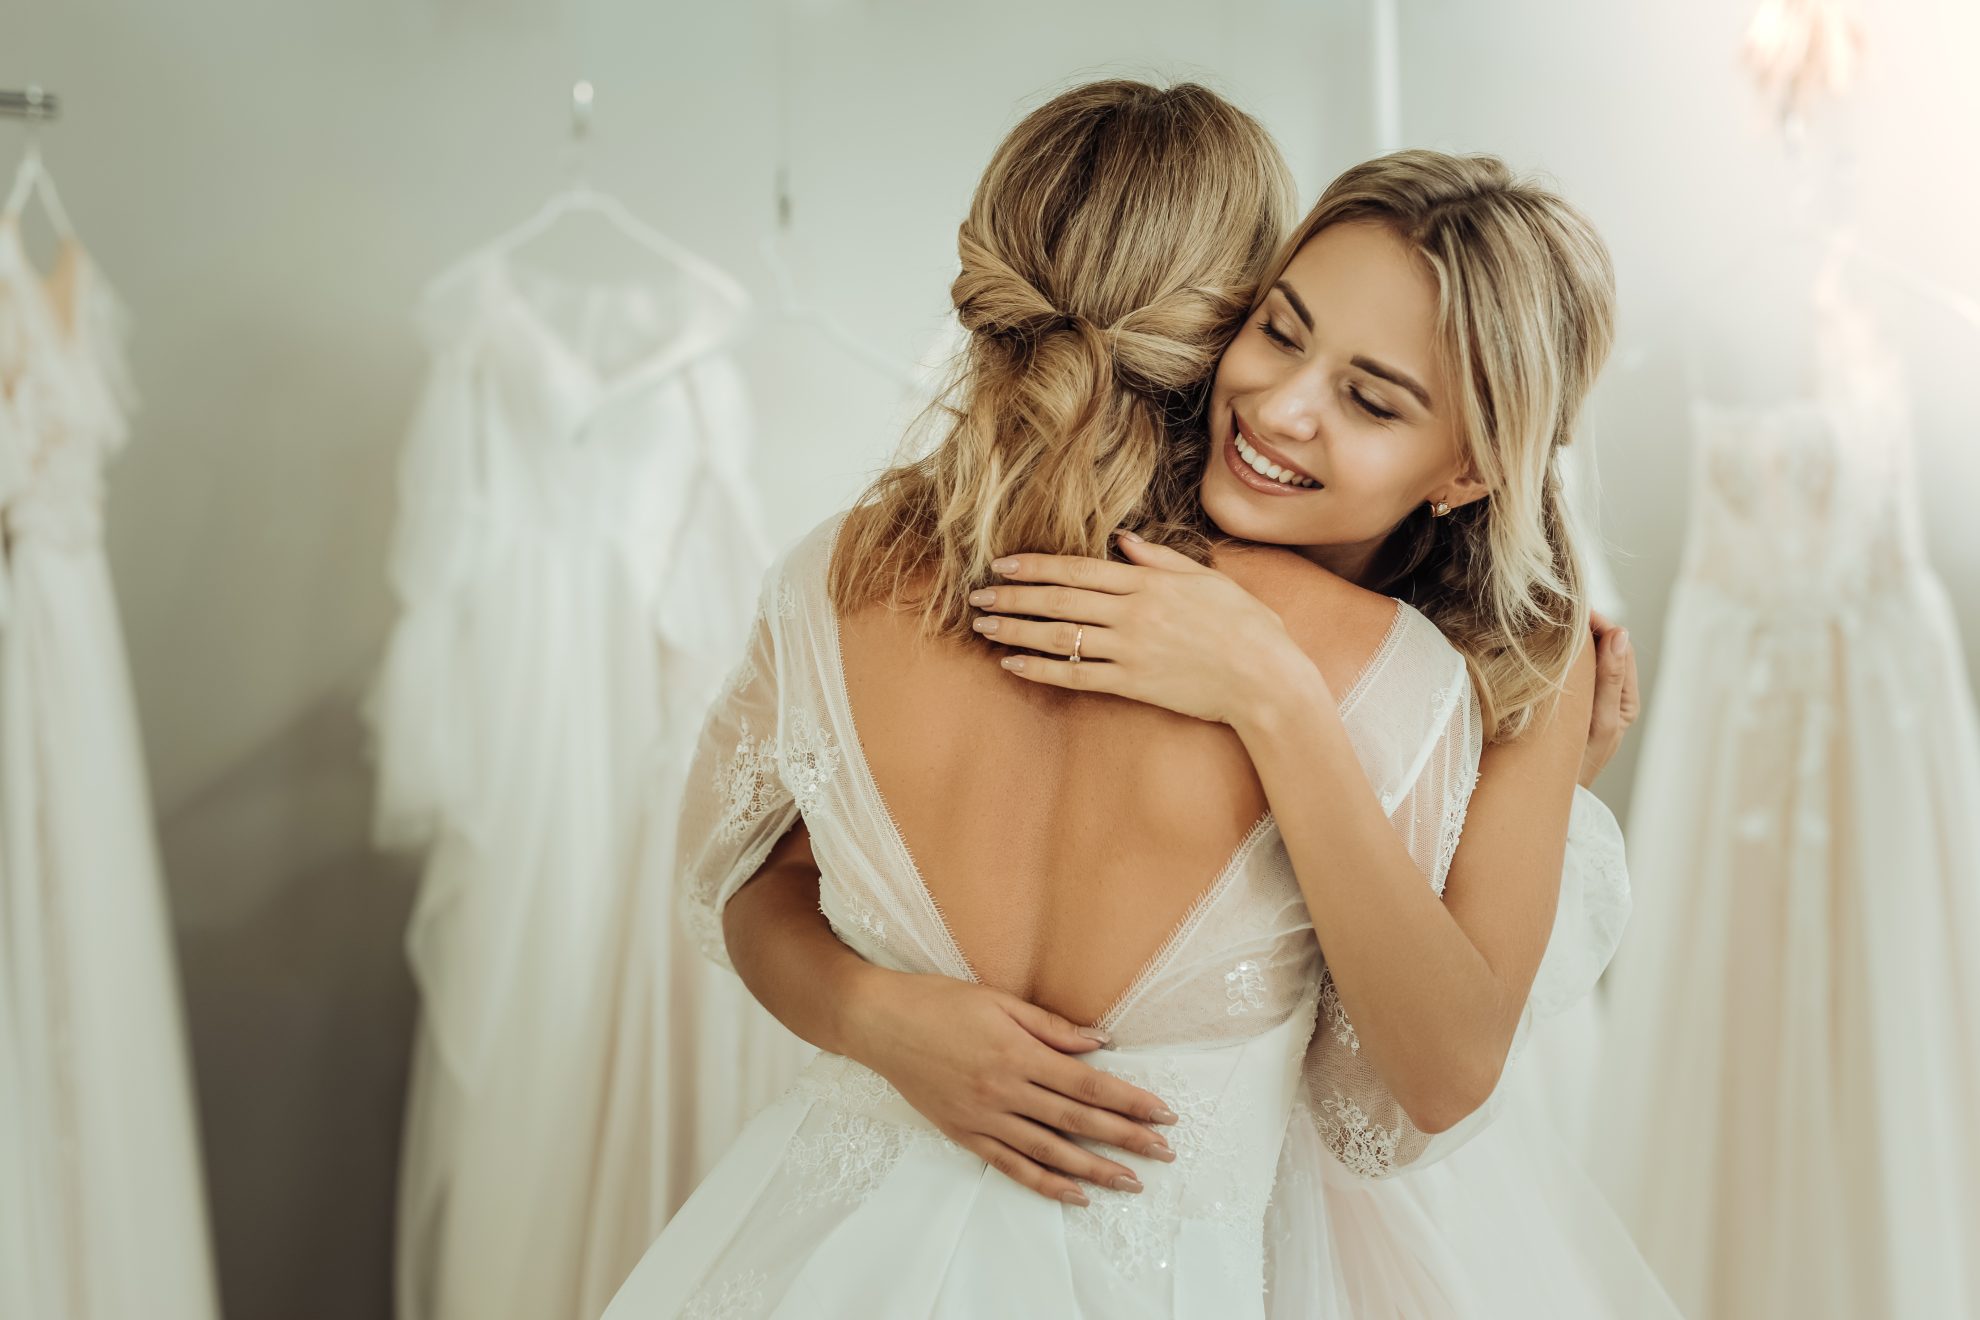 A bridemaid hugs a bride in a wedding dress shop. Image used in the Maid of Honour Duties : The Ultimate Guide article.